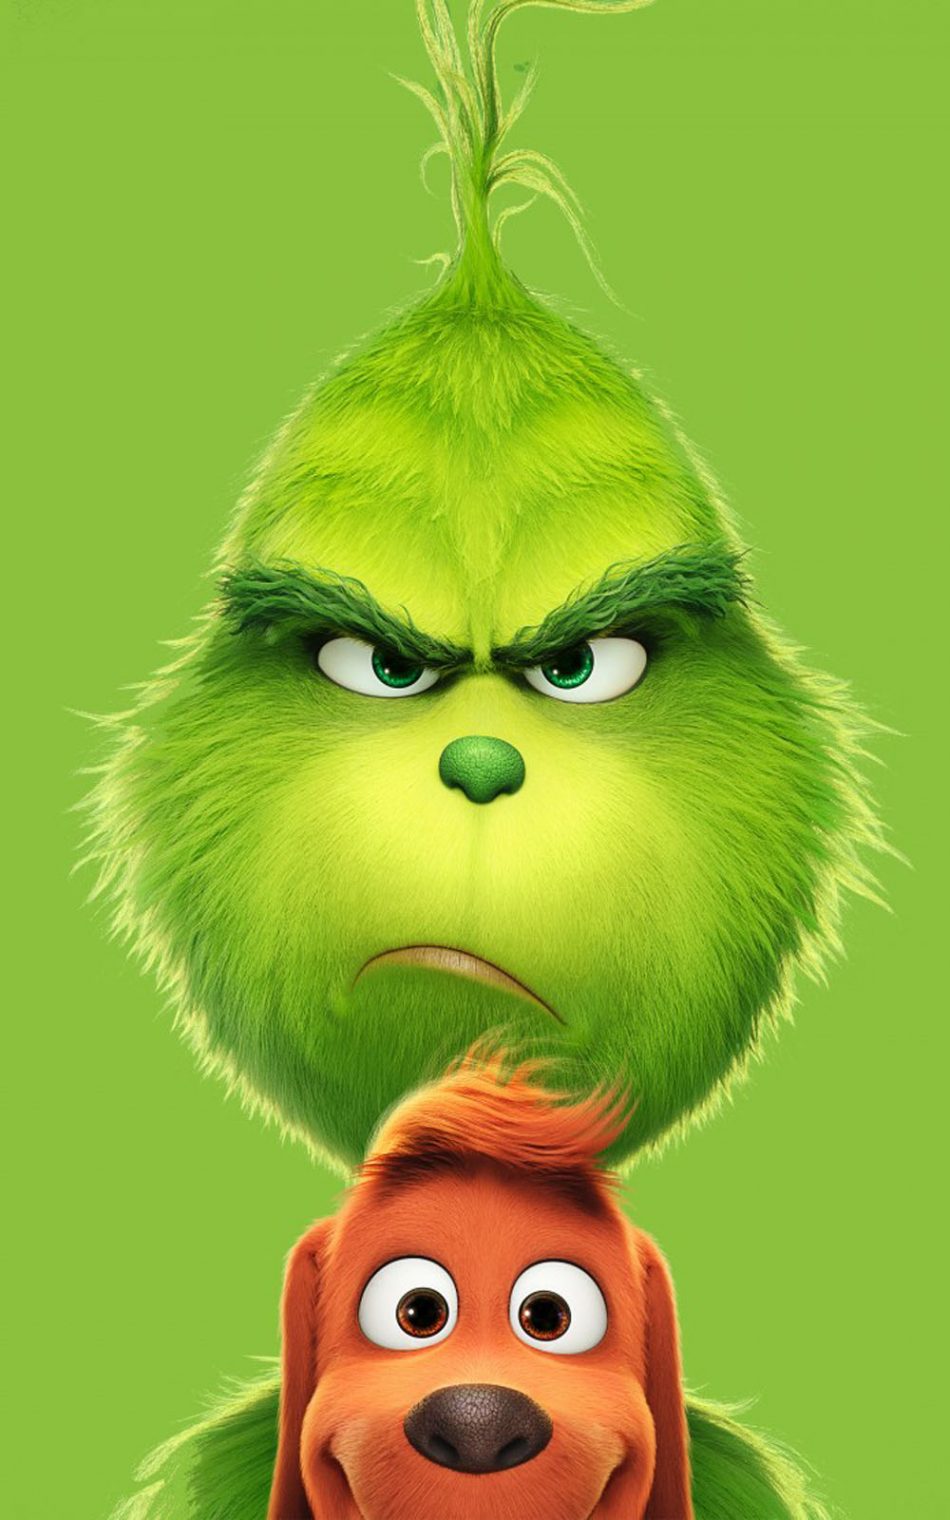 The Grinch Animation Comedy 2018 4K Ultra HD Mobile Wallpaper